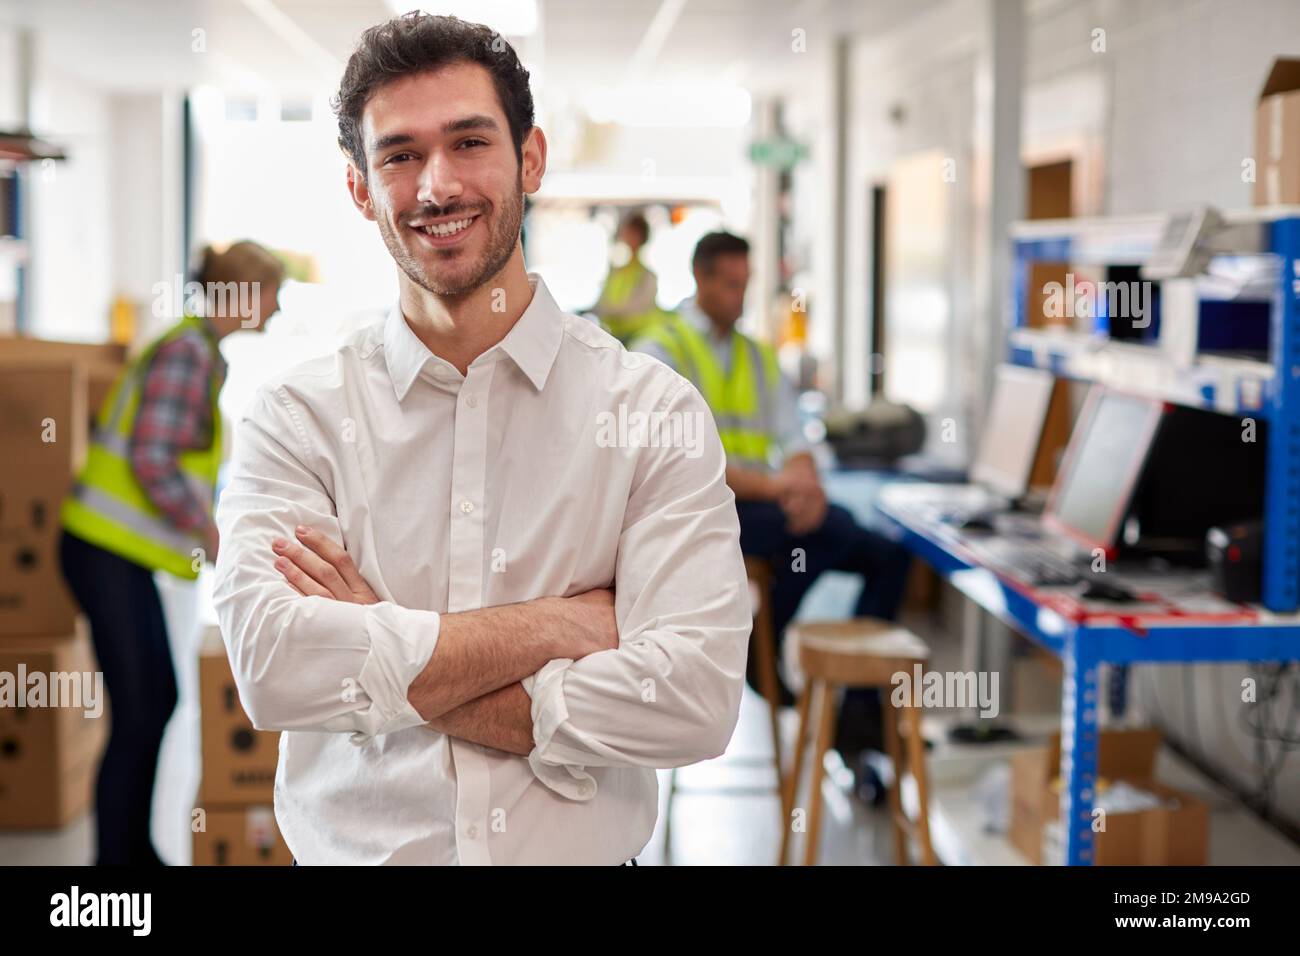 Portrait Of Male Manager In Logistics Distribution Warehouse Stock Photo